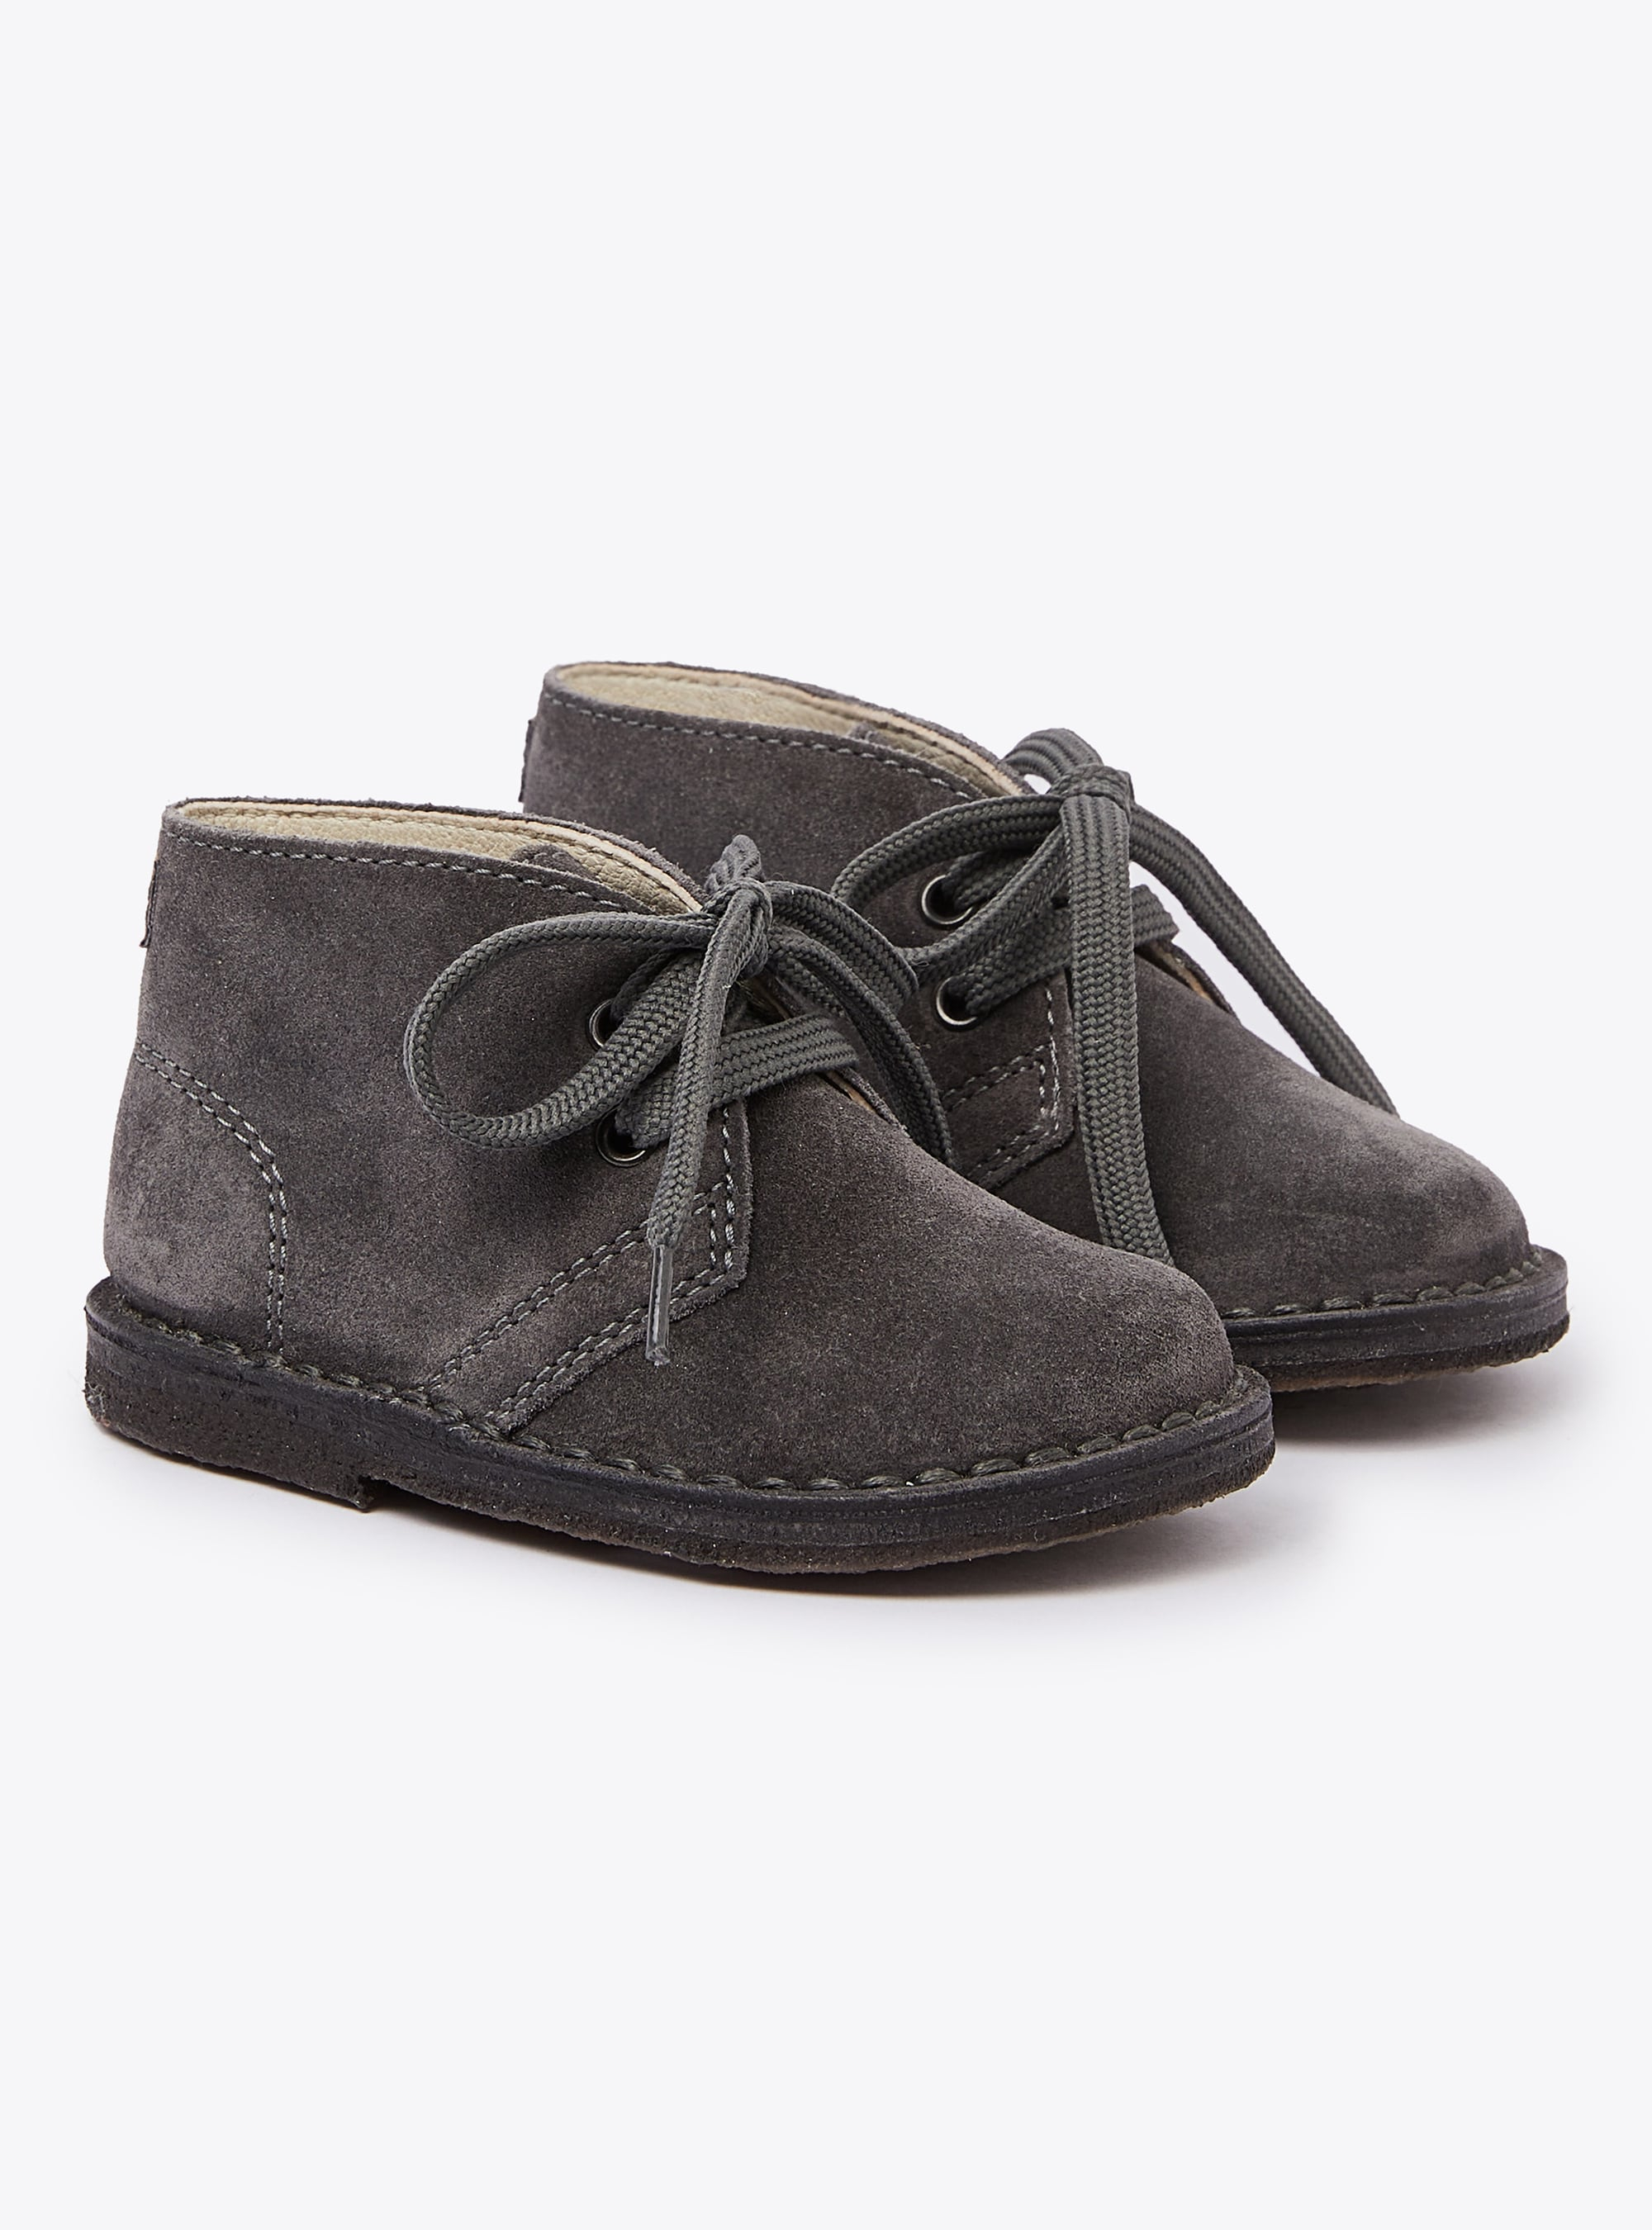 Charcoal grey suede baby shoes - Shoes - Il Gufo